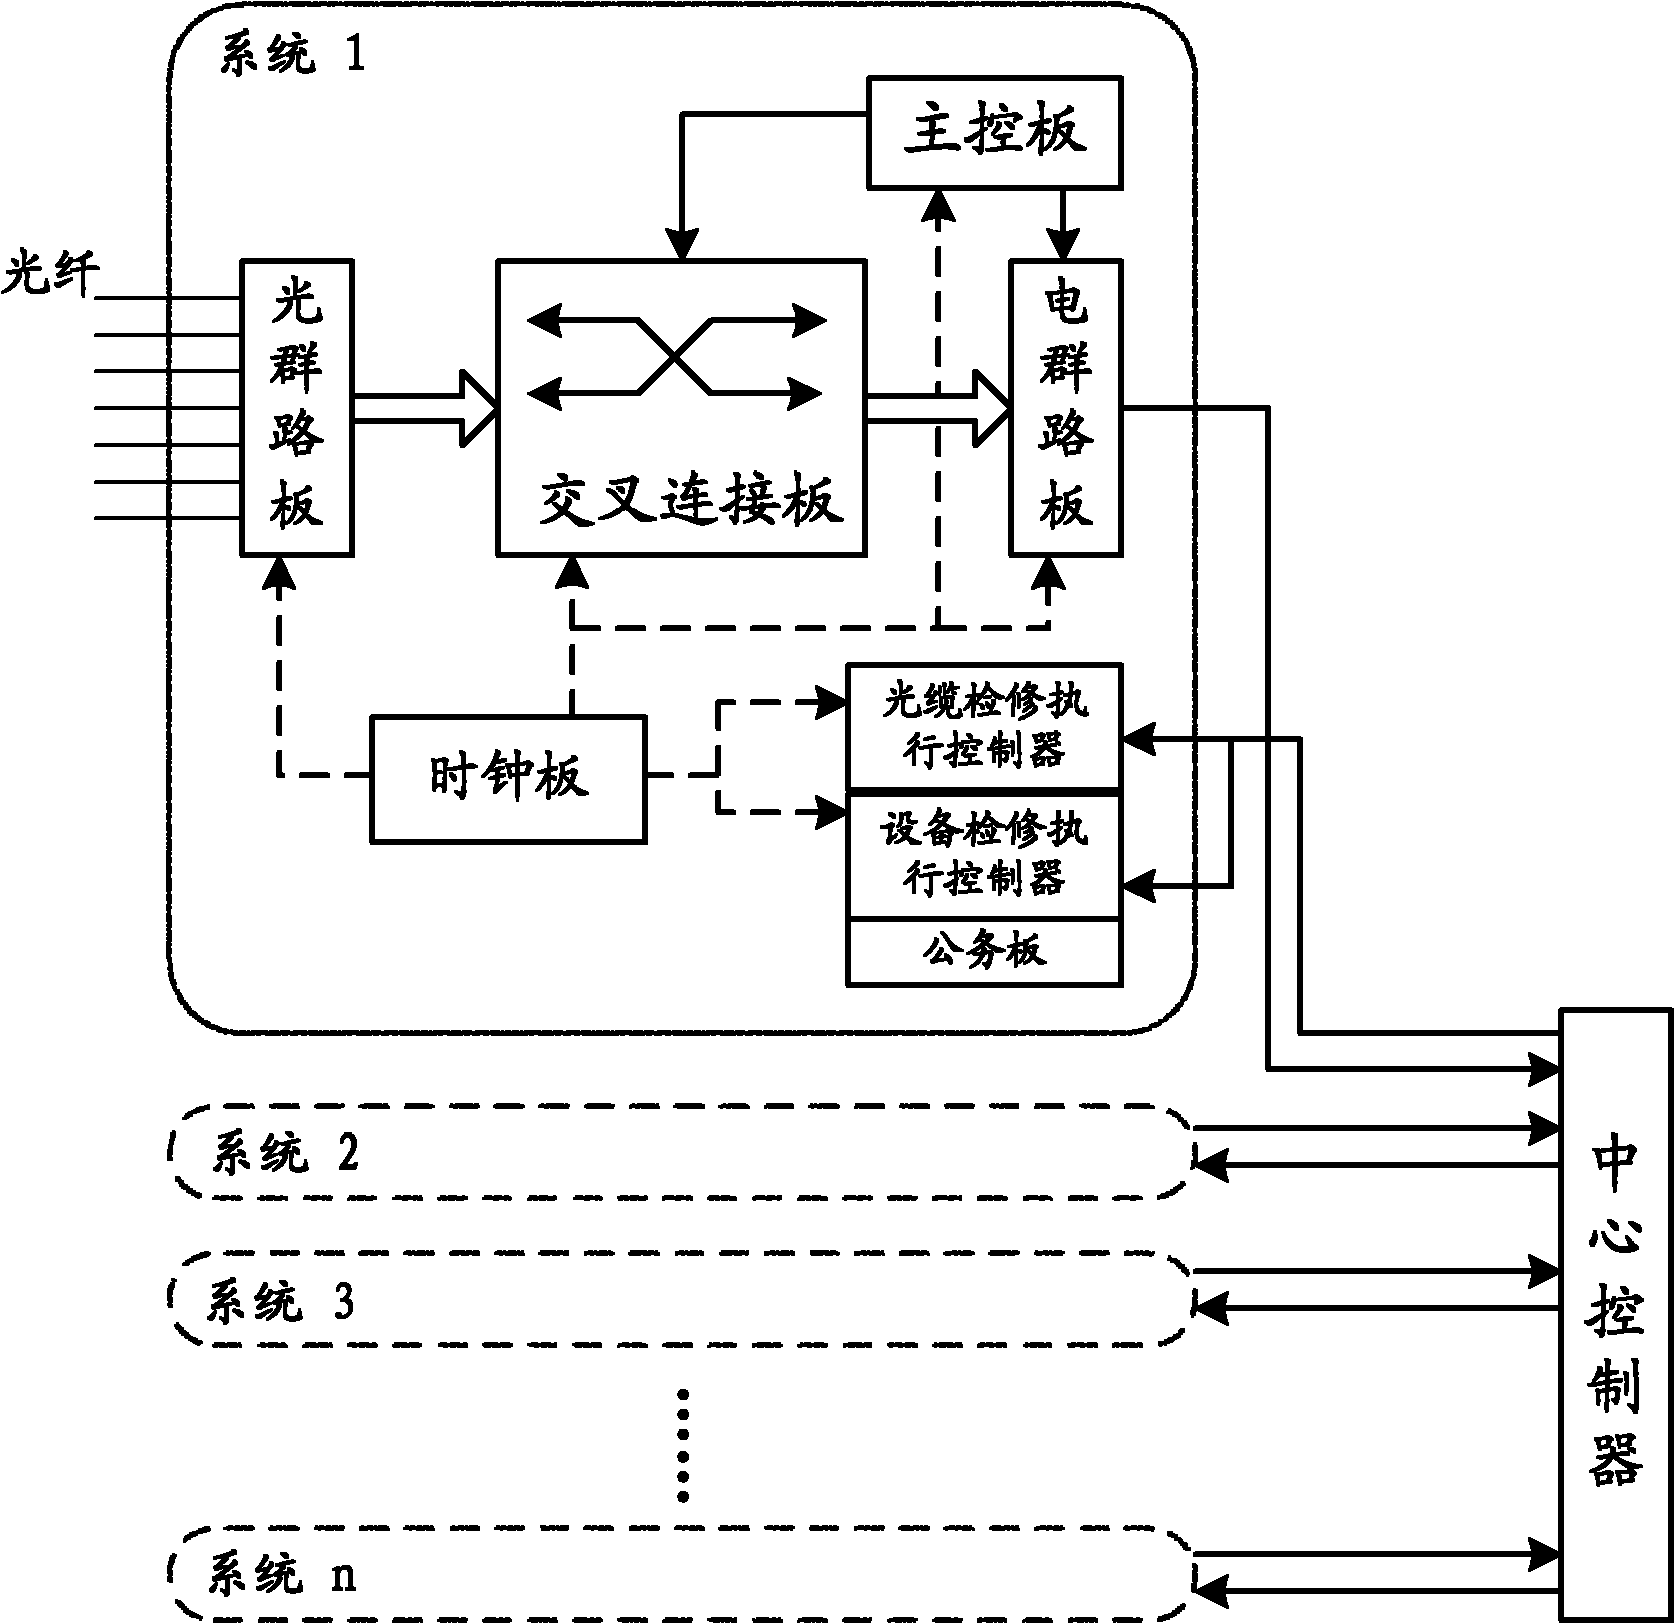 Operational decision making system of lumped control multi-type heterogeneous electricity communication network